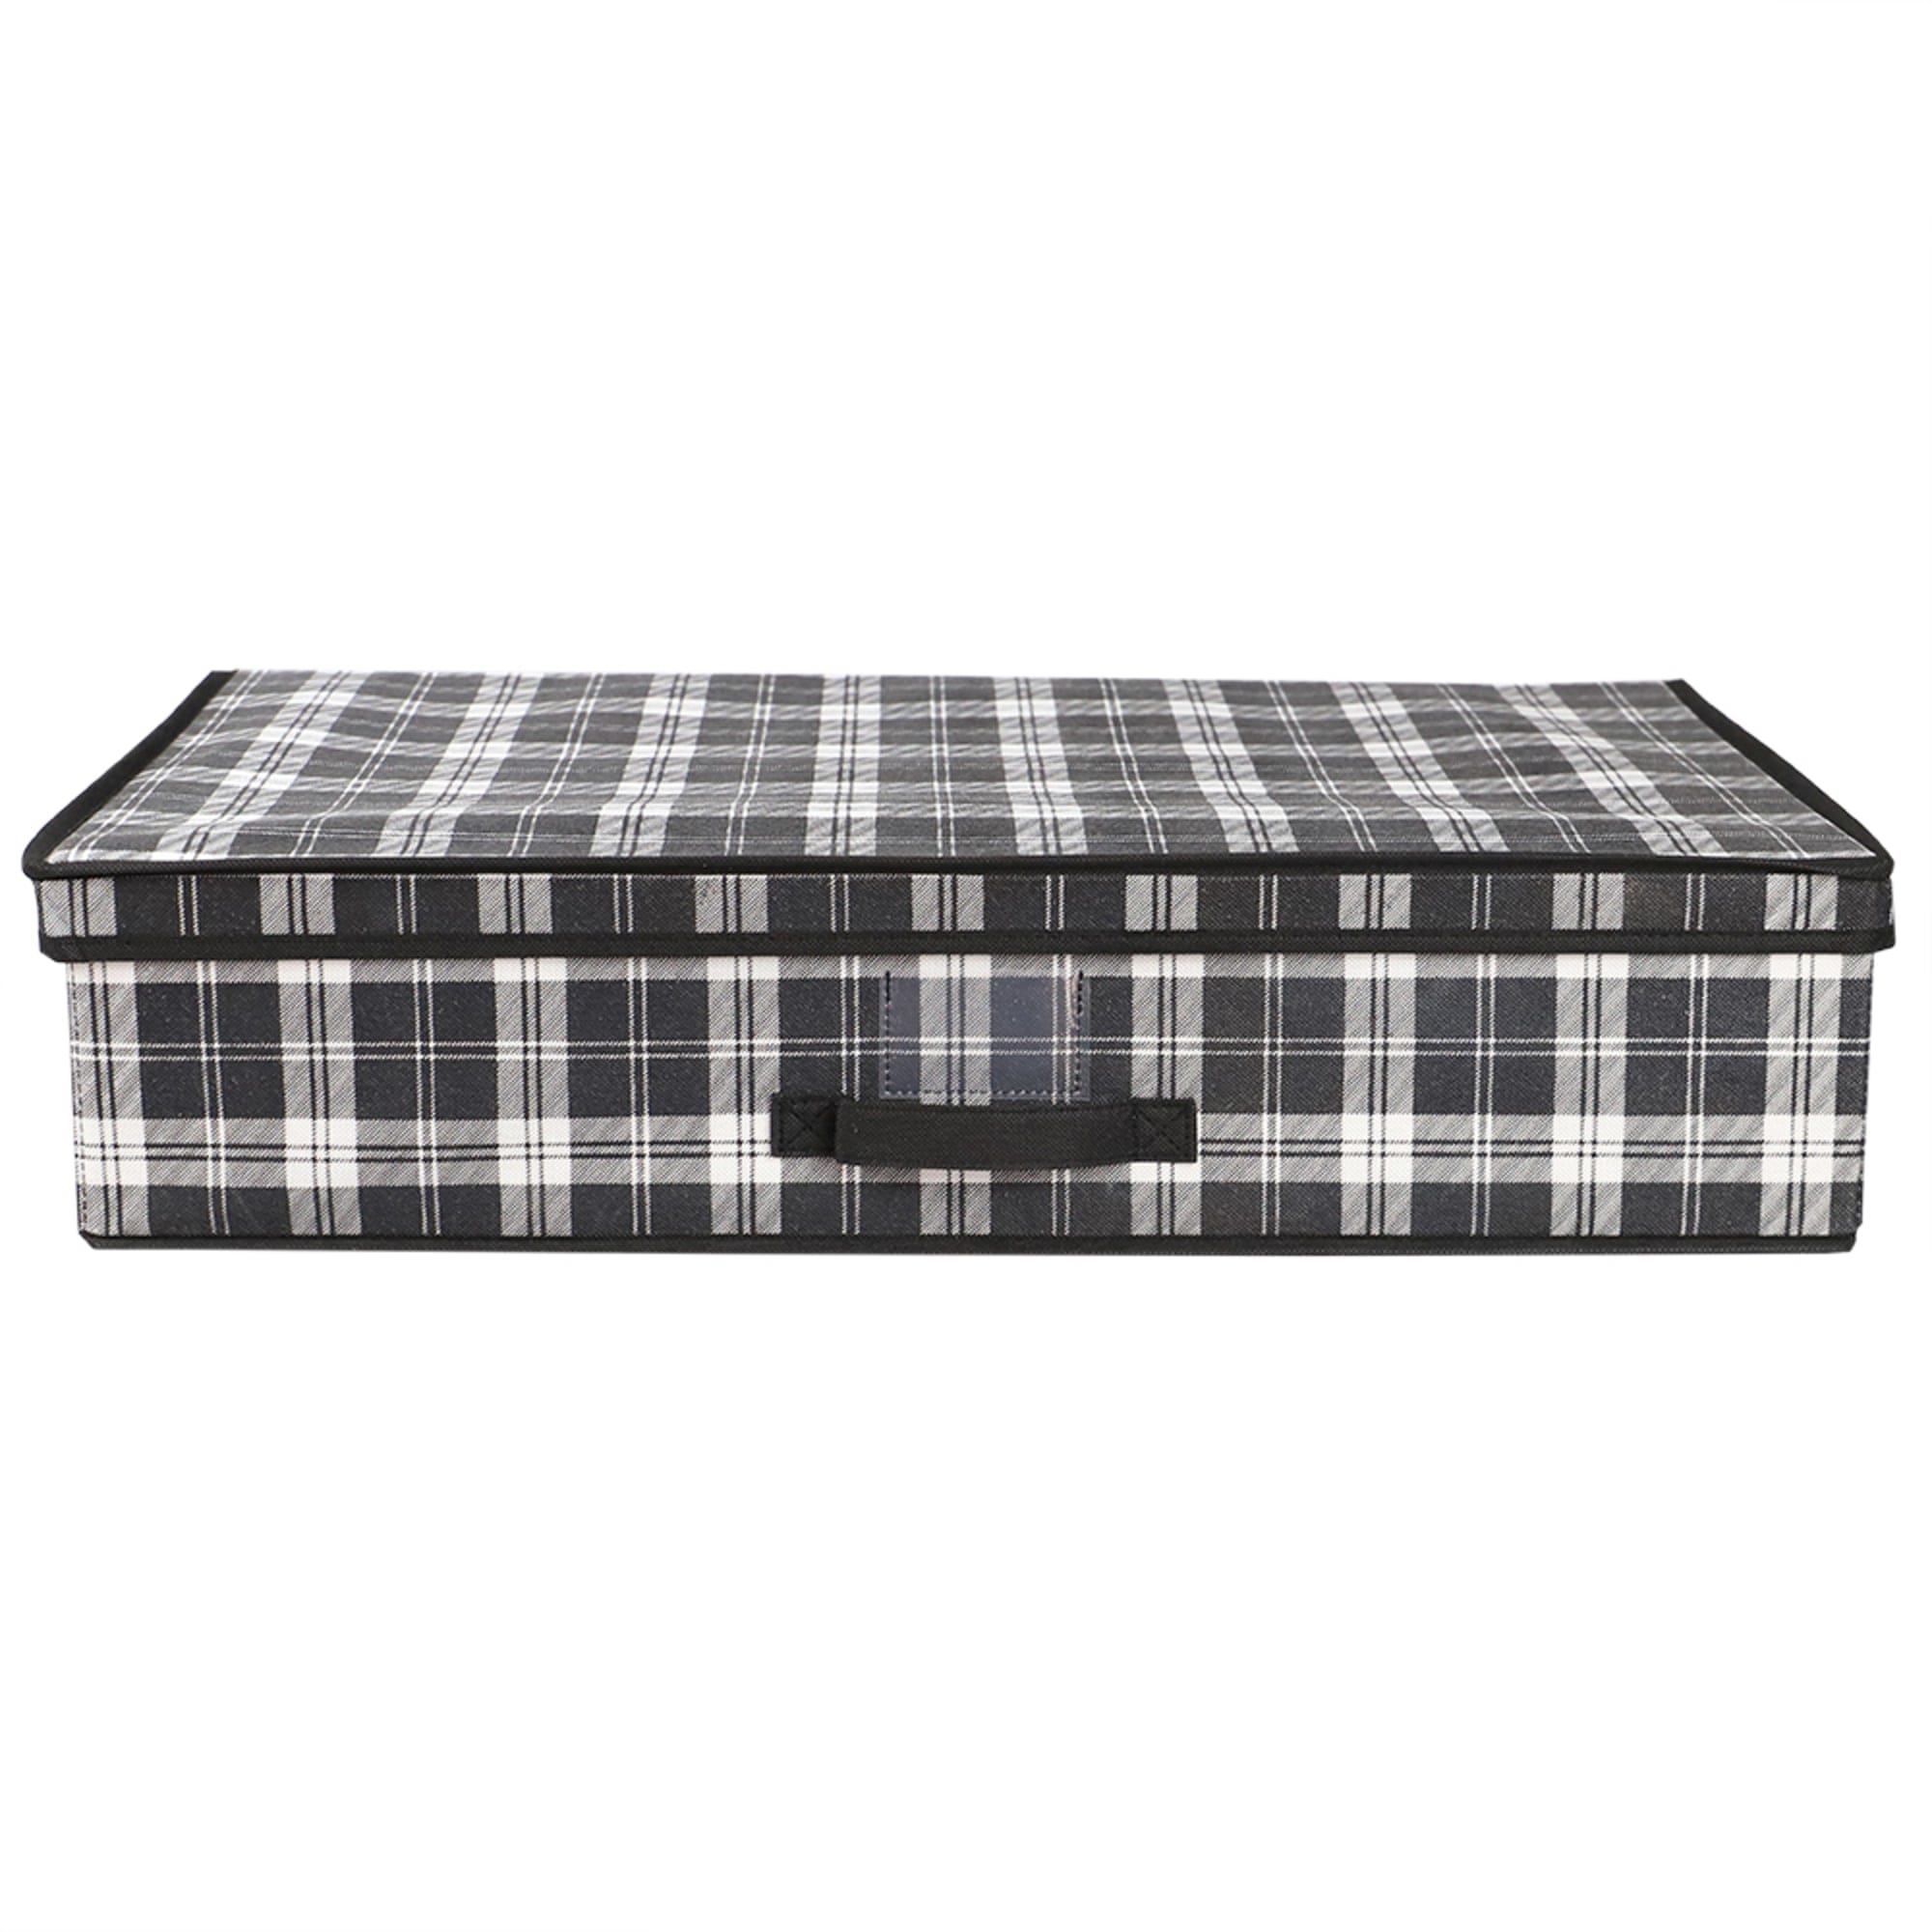 Home Basics Plaid Non-Woven Under the Bed Storage Box with Label Window, Black $8.00 EACH, CASE PACK OF 12